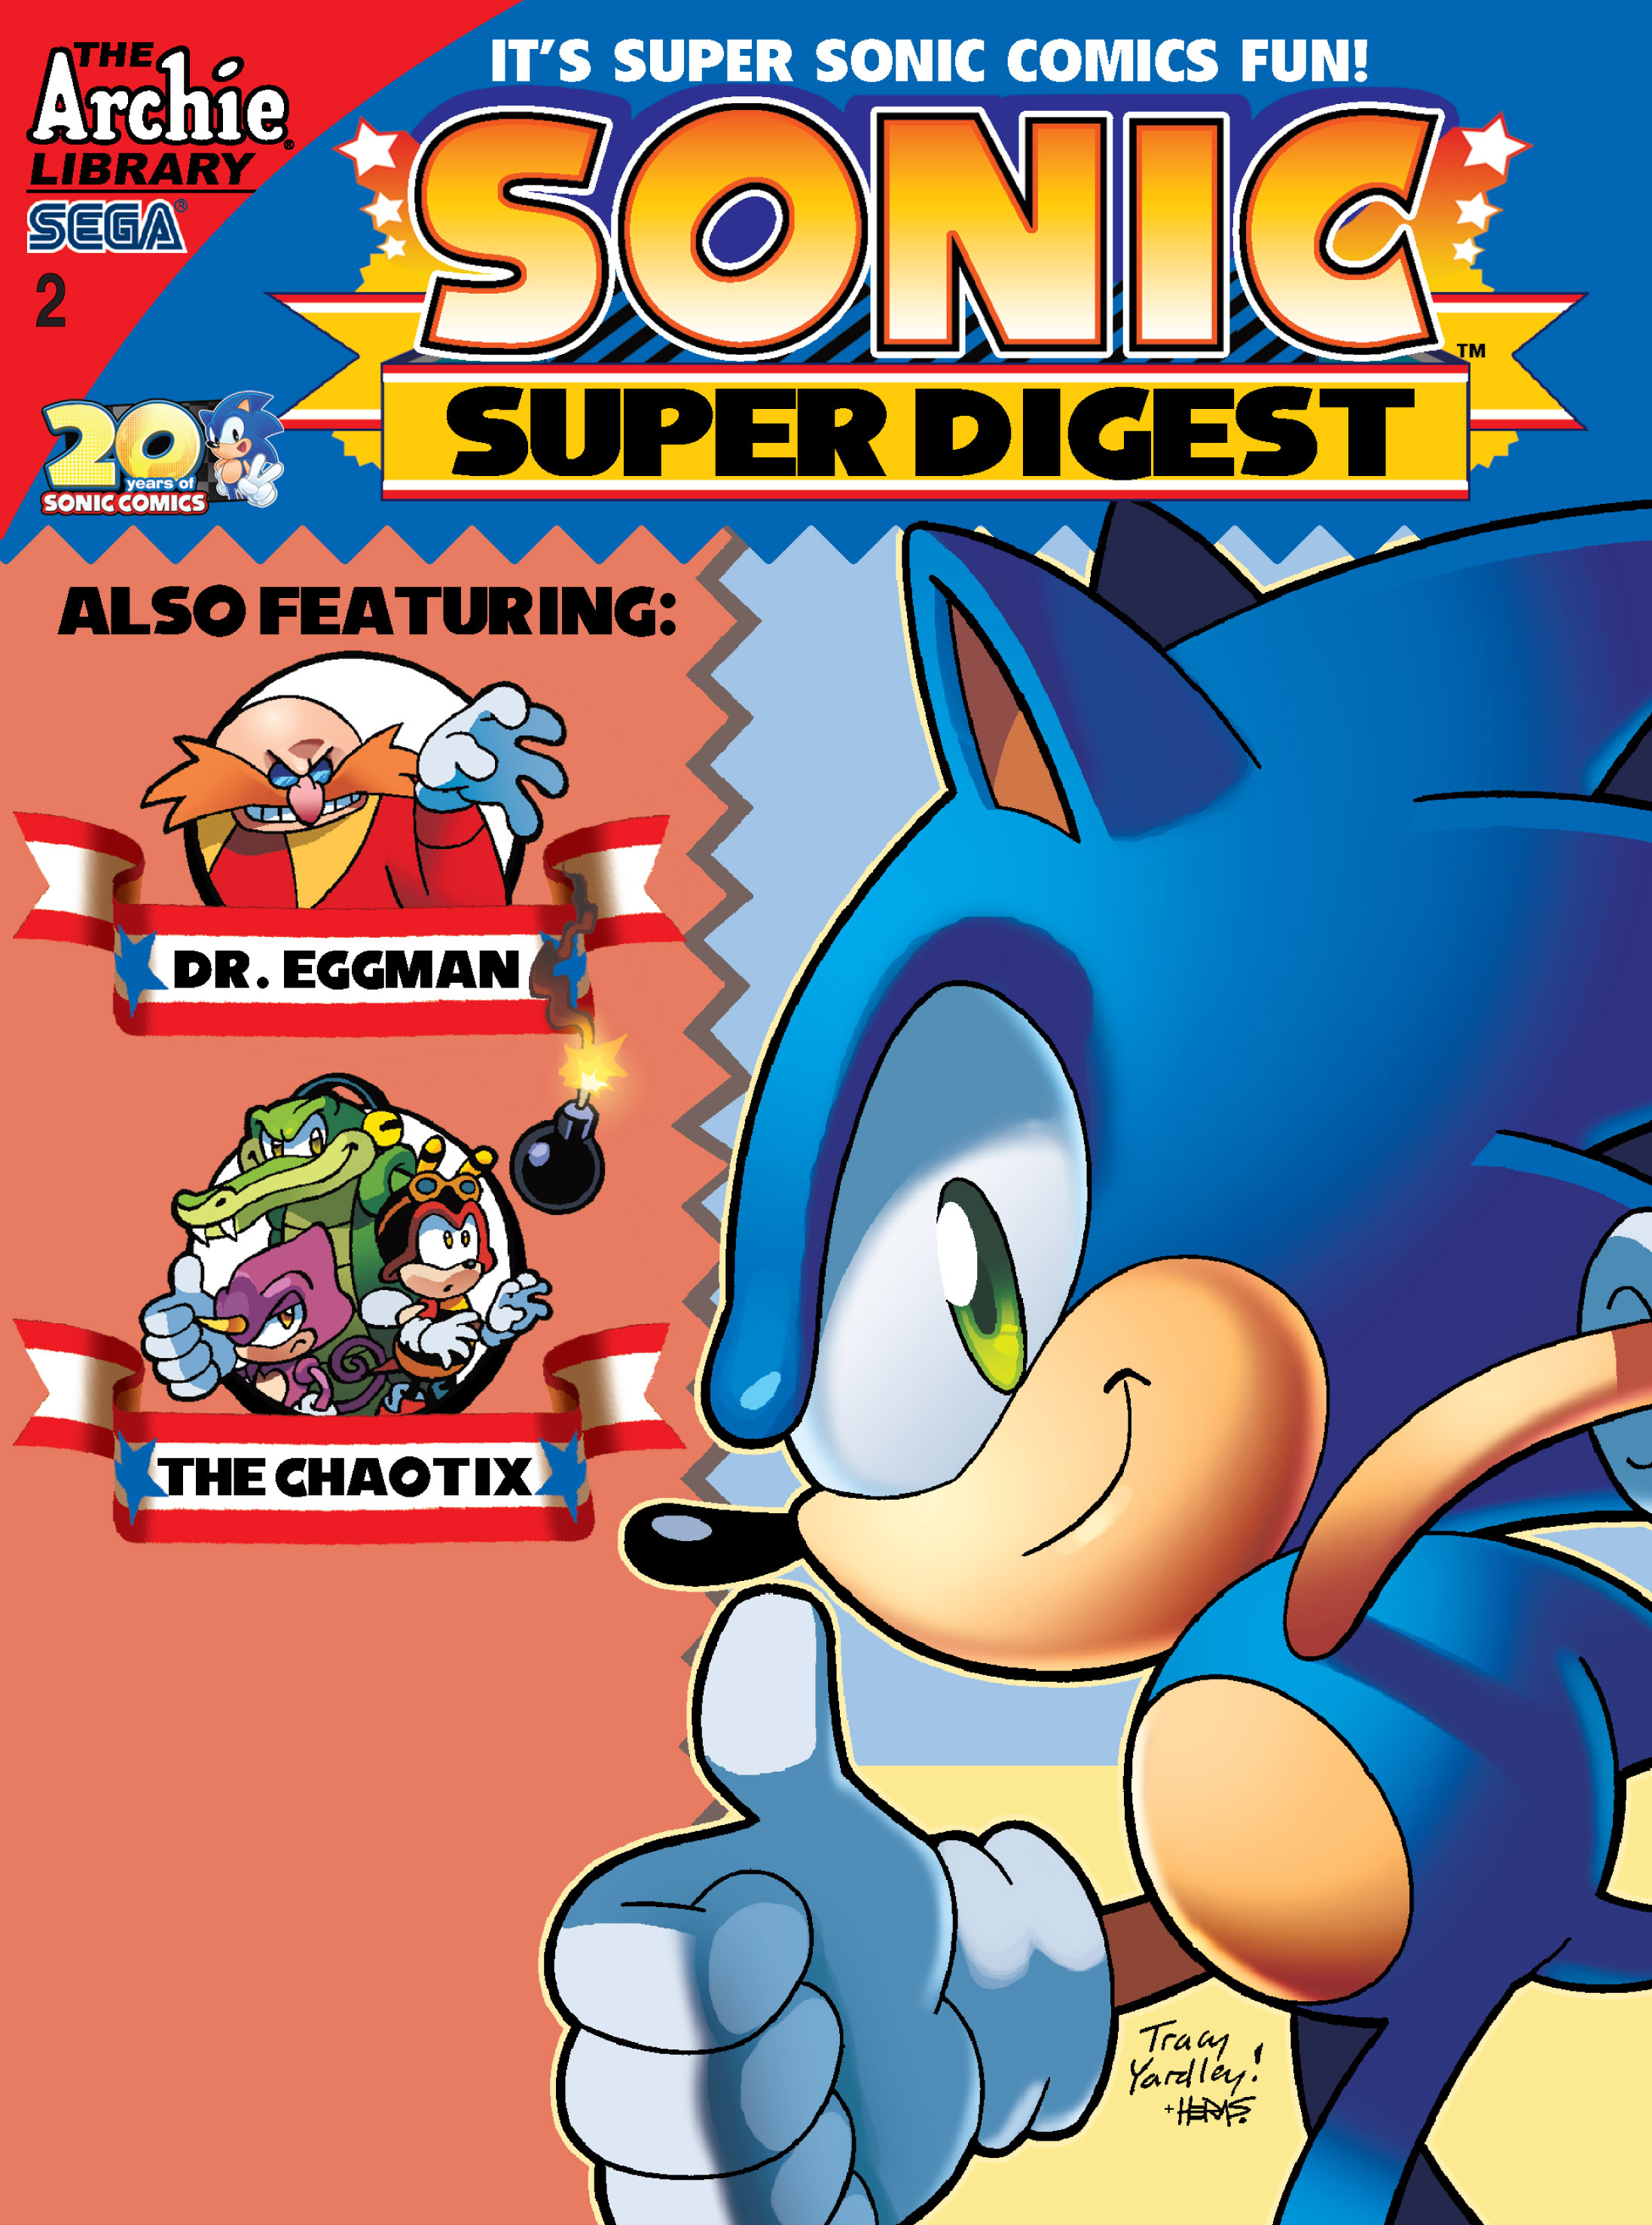 Archie Sonic Online — Super Mighty and Super Ray?